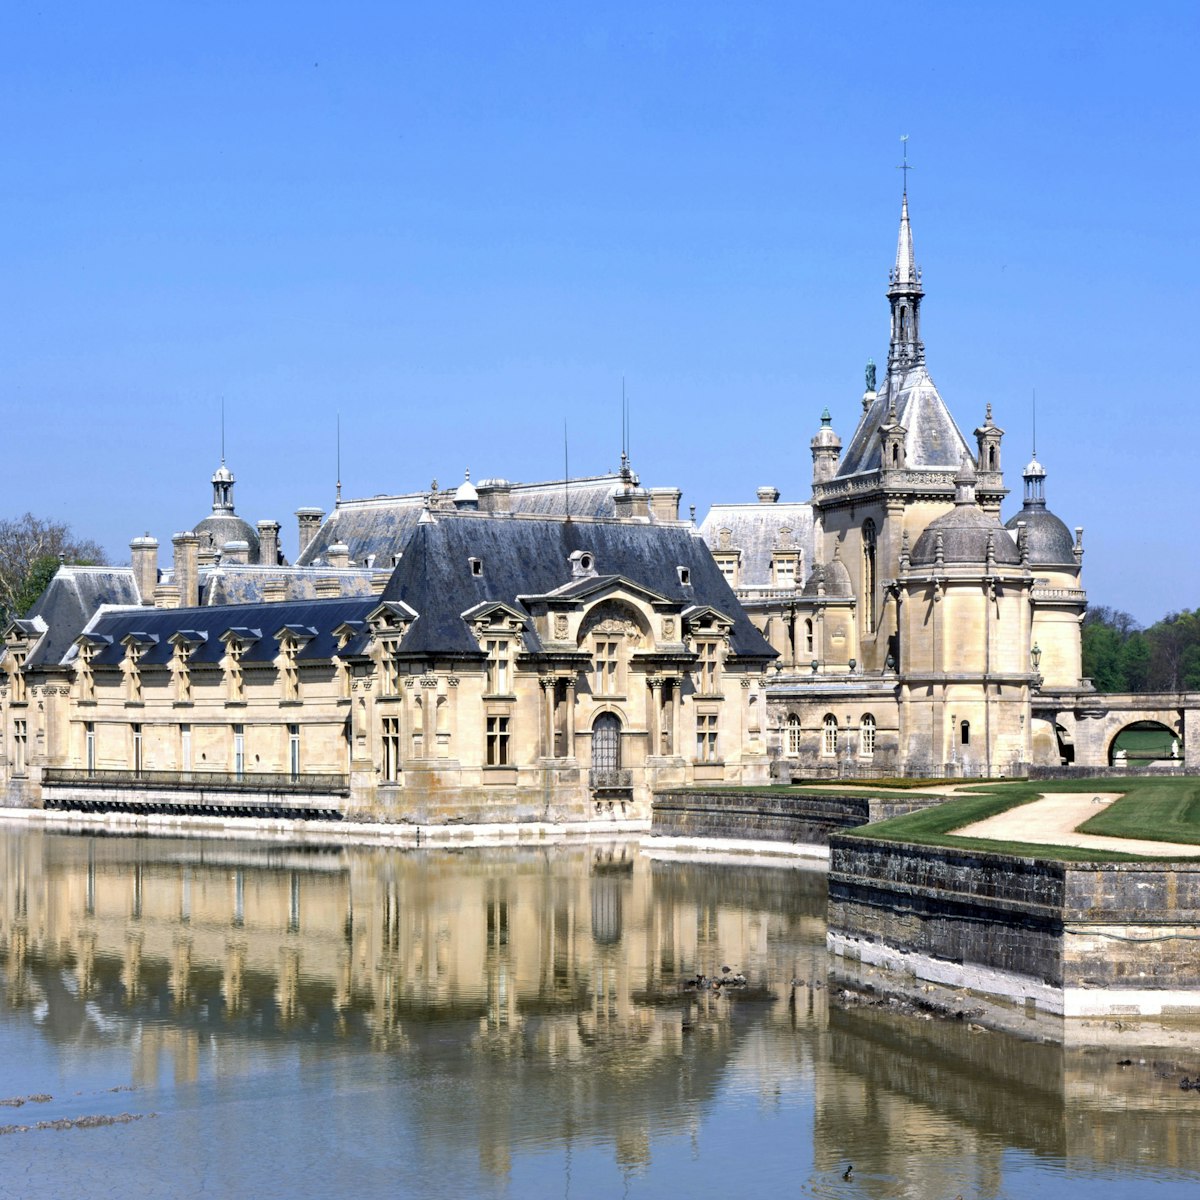 Chateau Chantilly Oise, France (Photo by: Digital Light Source/UIG via Getty Images)